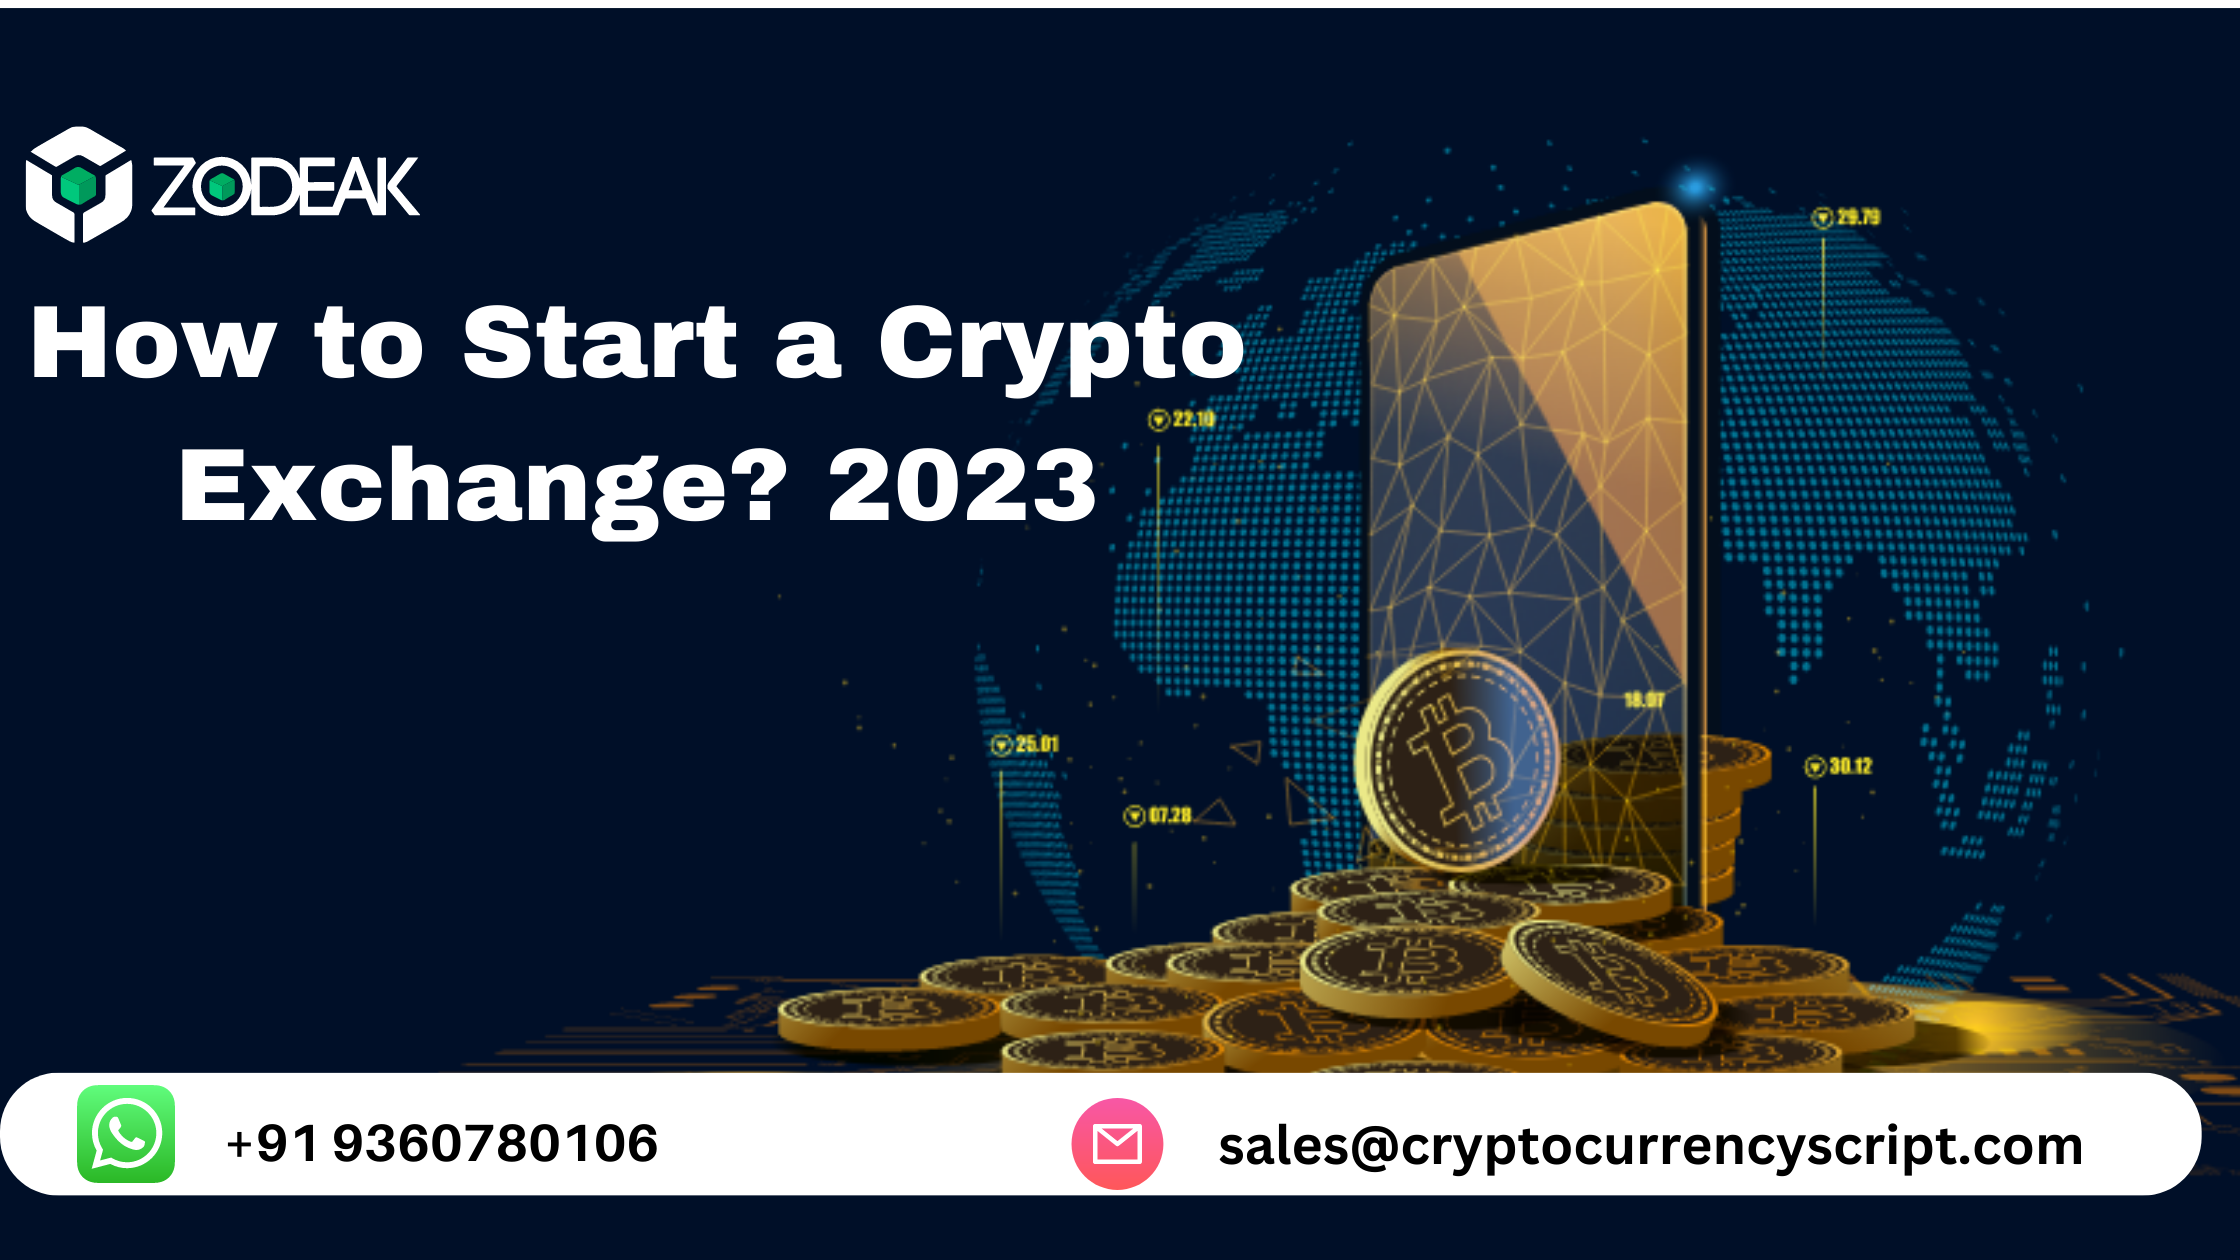 How to Start a Crypto Exchange? - A Guide 2023